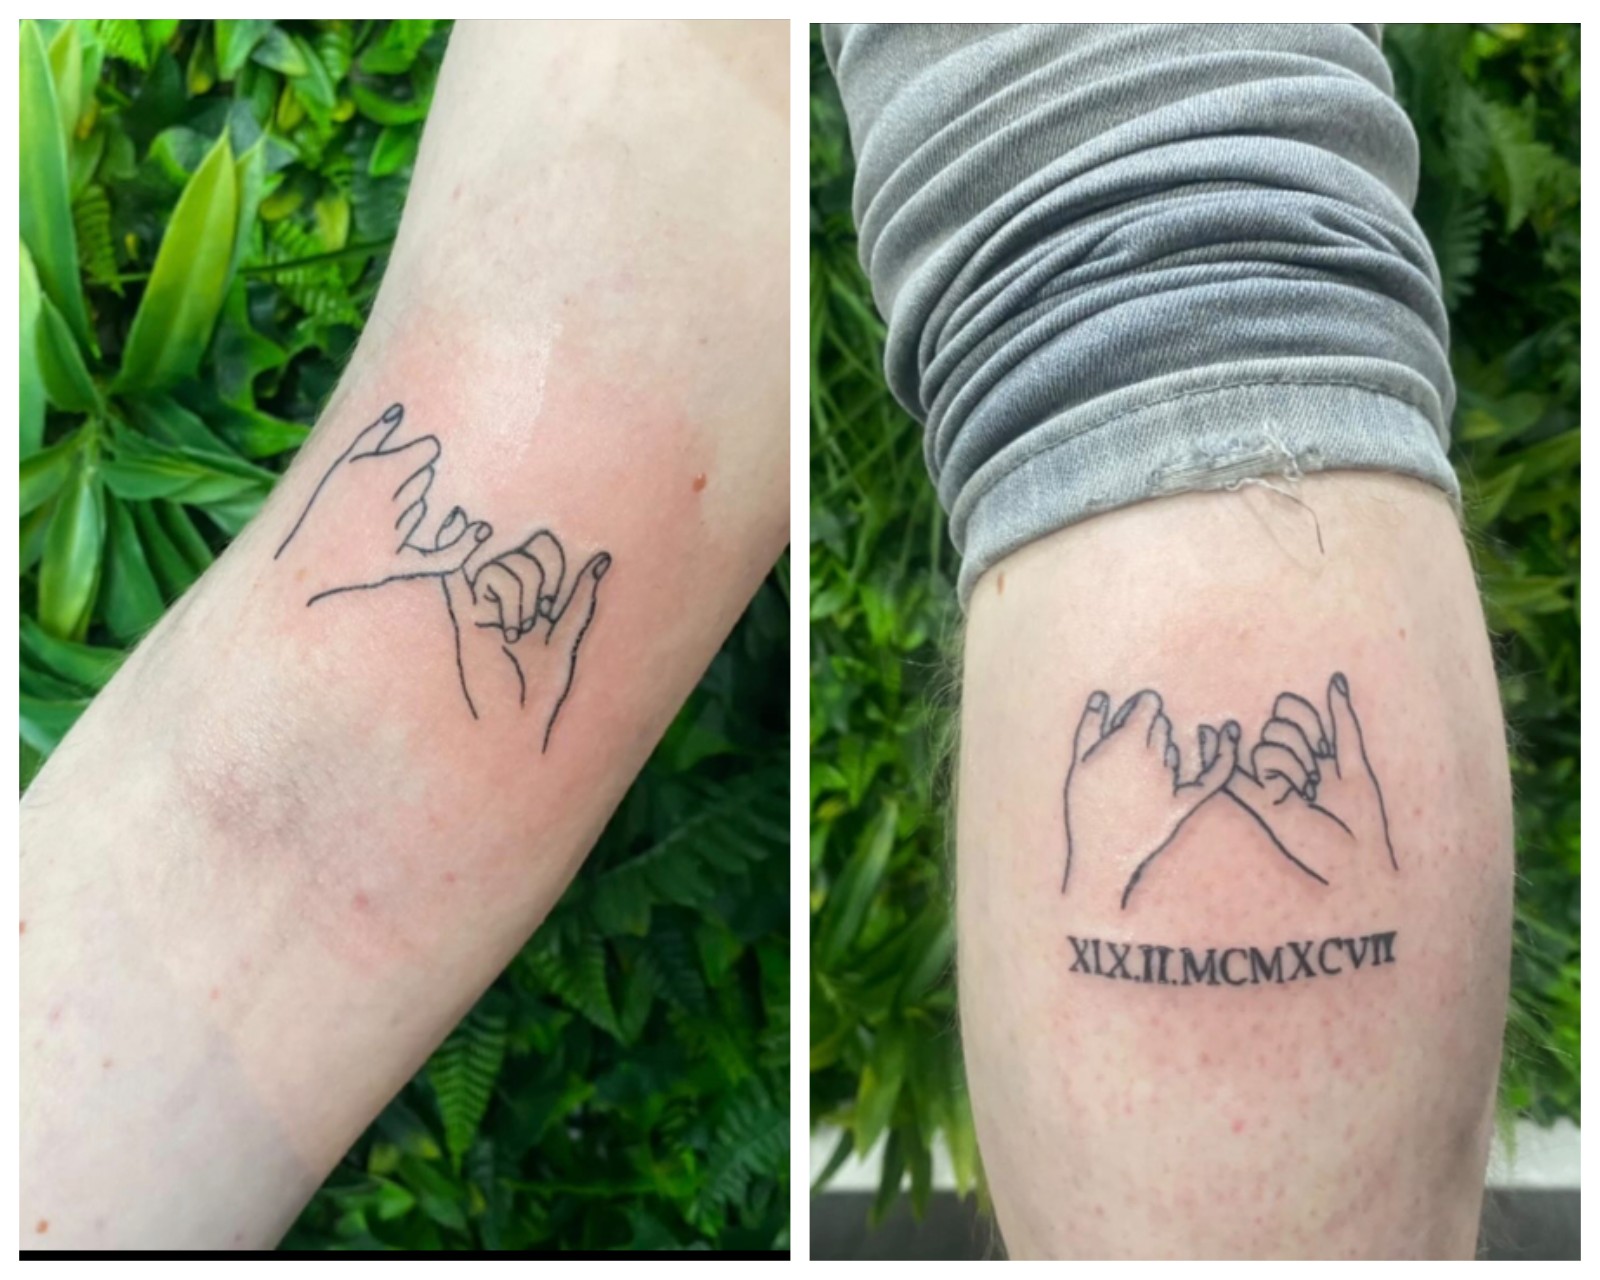 Rhianne on Twitter Matching twin tattoos with my brother today  a  friend for life I couldnt decide on the font for our date of birth for  mine design pending lol httpstcoSK5H8oIaJK 